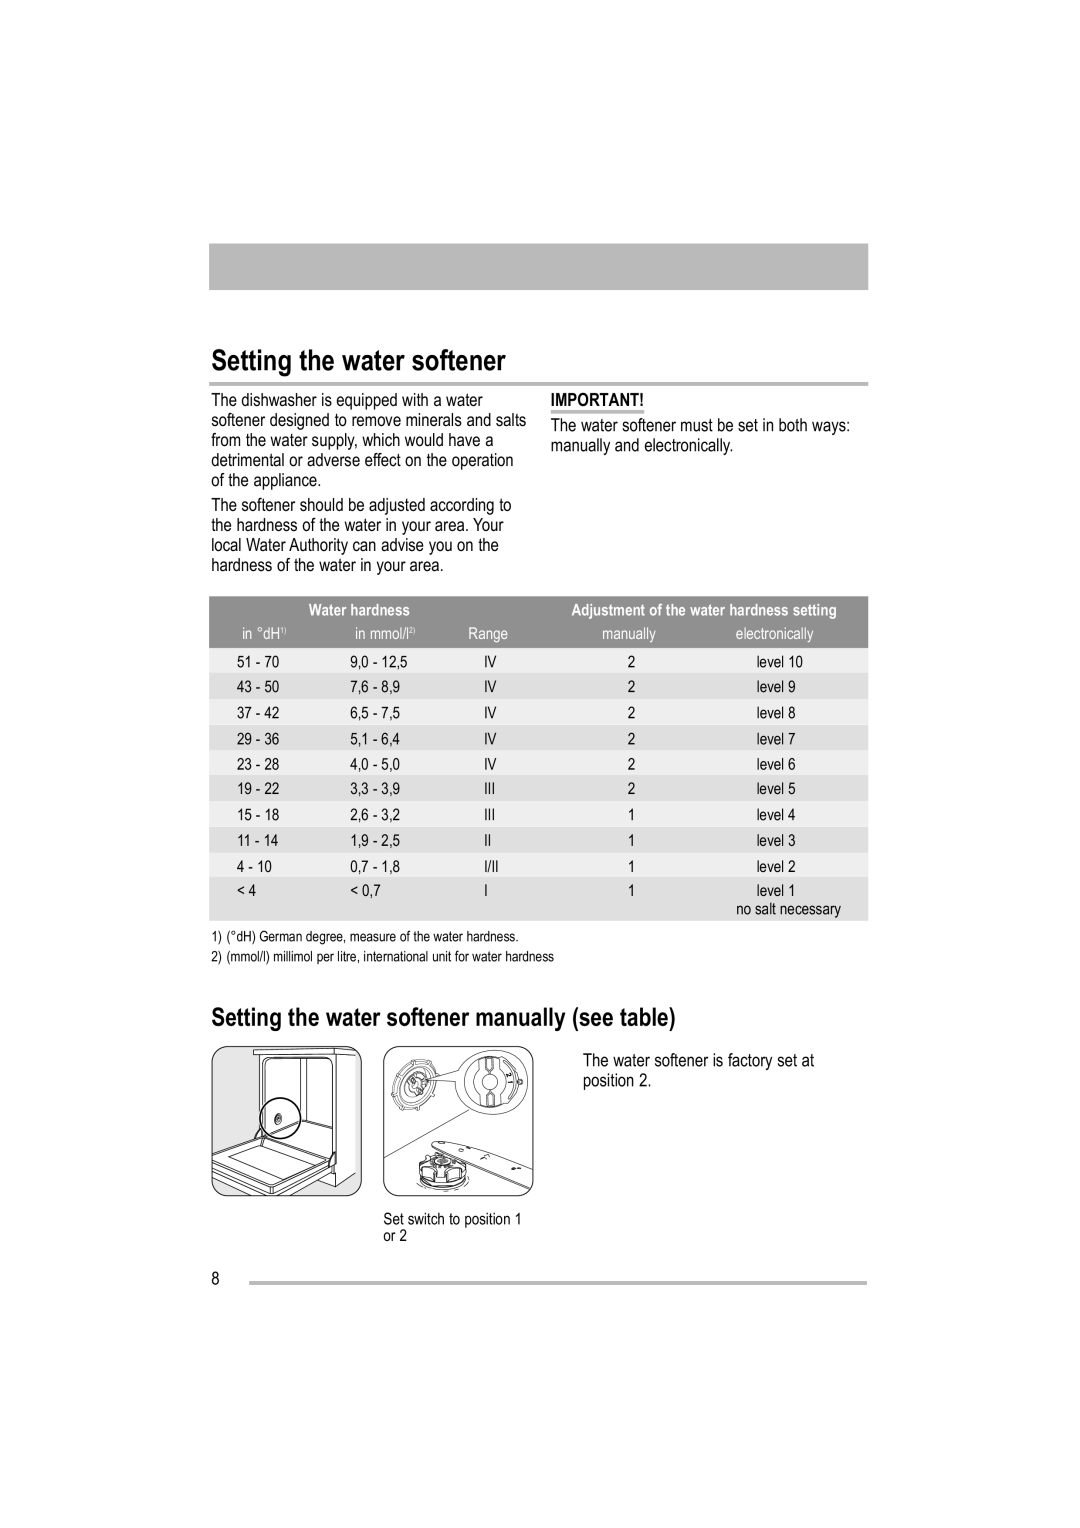 Moffat MDW 542 user manual Setting the water softener manually see table, Water hardness, in dH1, in mmol/l2, Range 